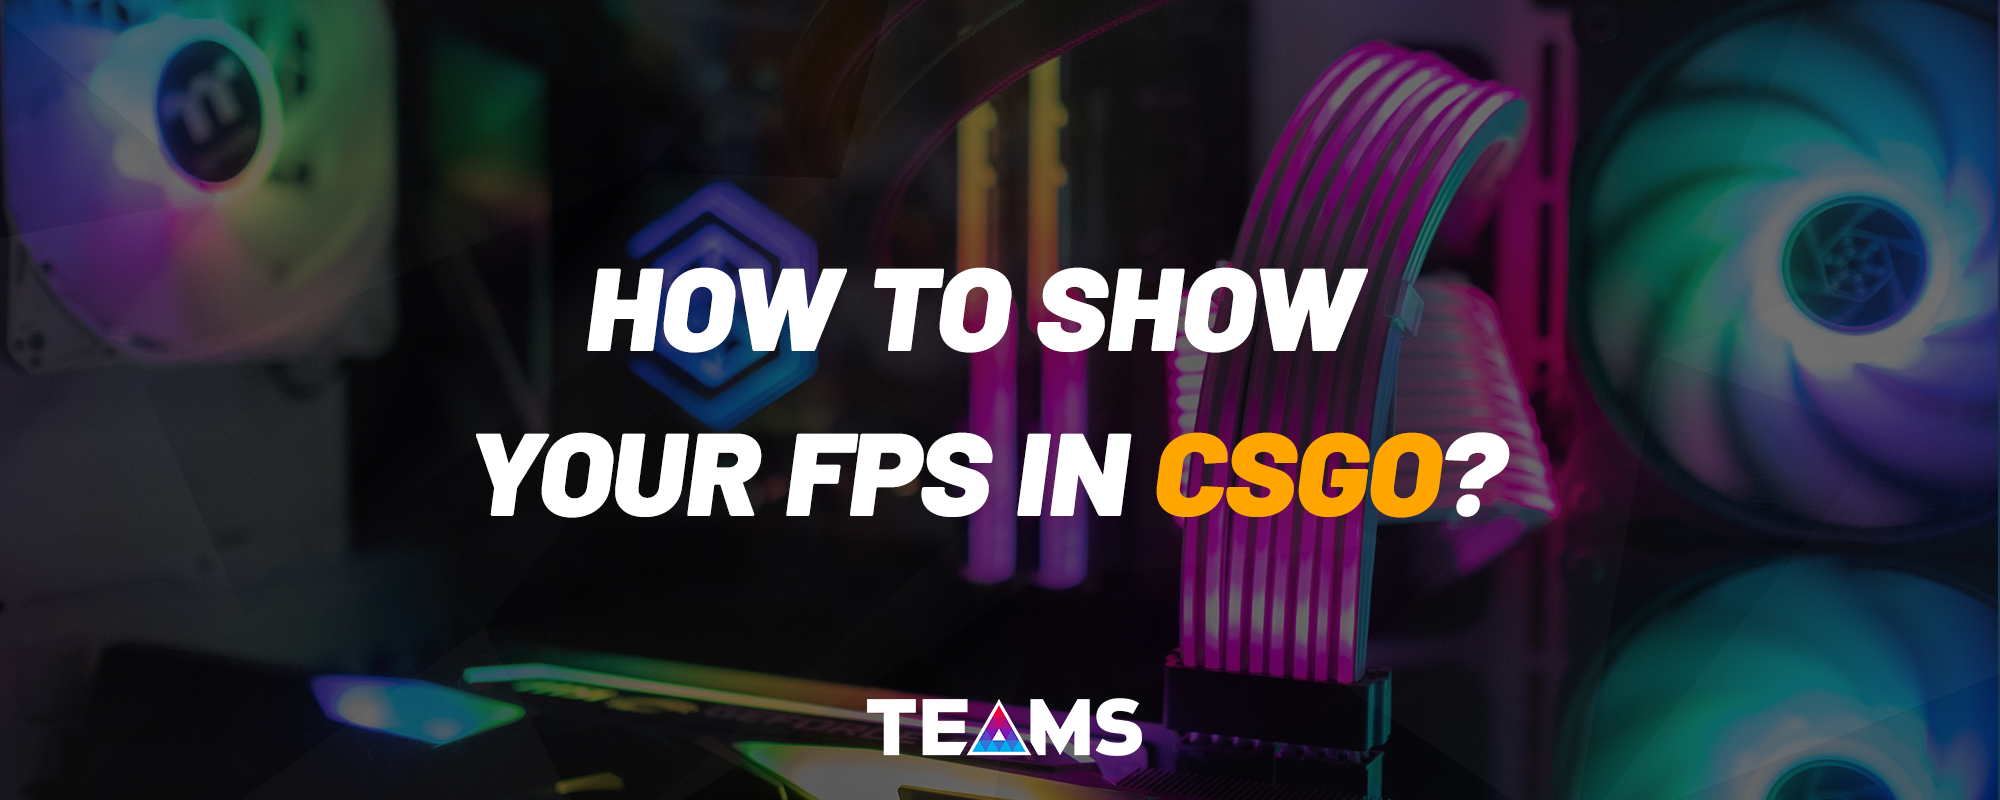 How to show your FPS in CSGO?